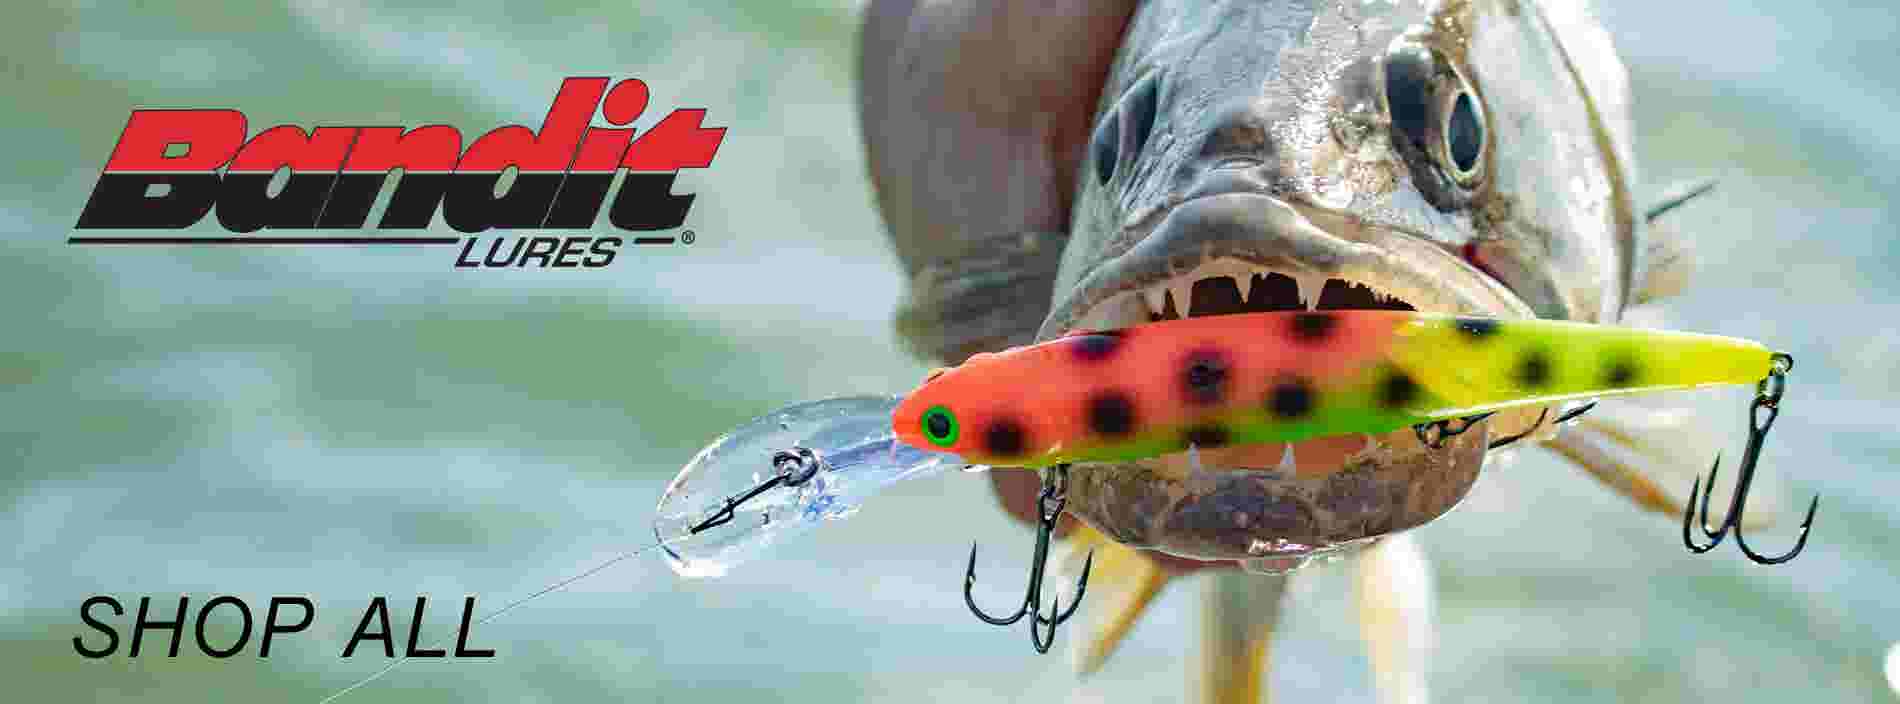 Bandit Lures: Fishing Lures, Lure Building